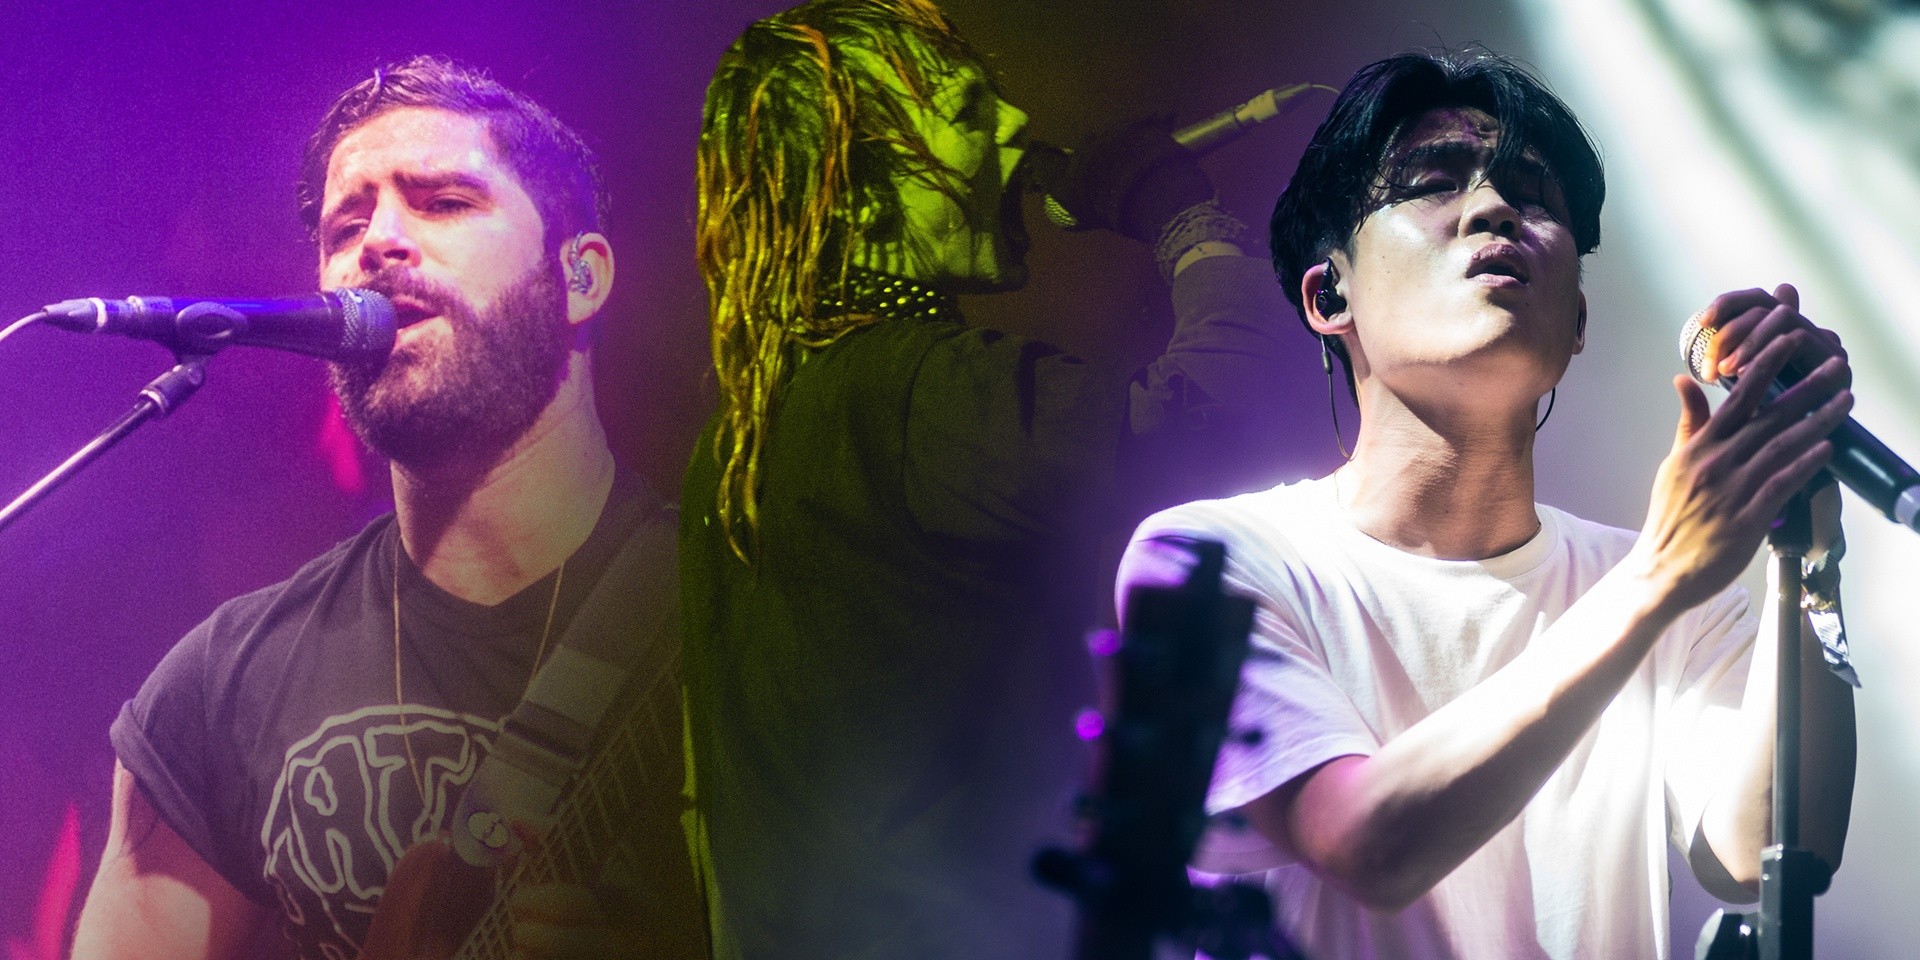 PHOTO GALLERY: Neon Lights 2016 Day 1 — Foals, Crystal Castles, 2manydjs, Neon Indian & more